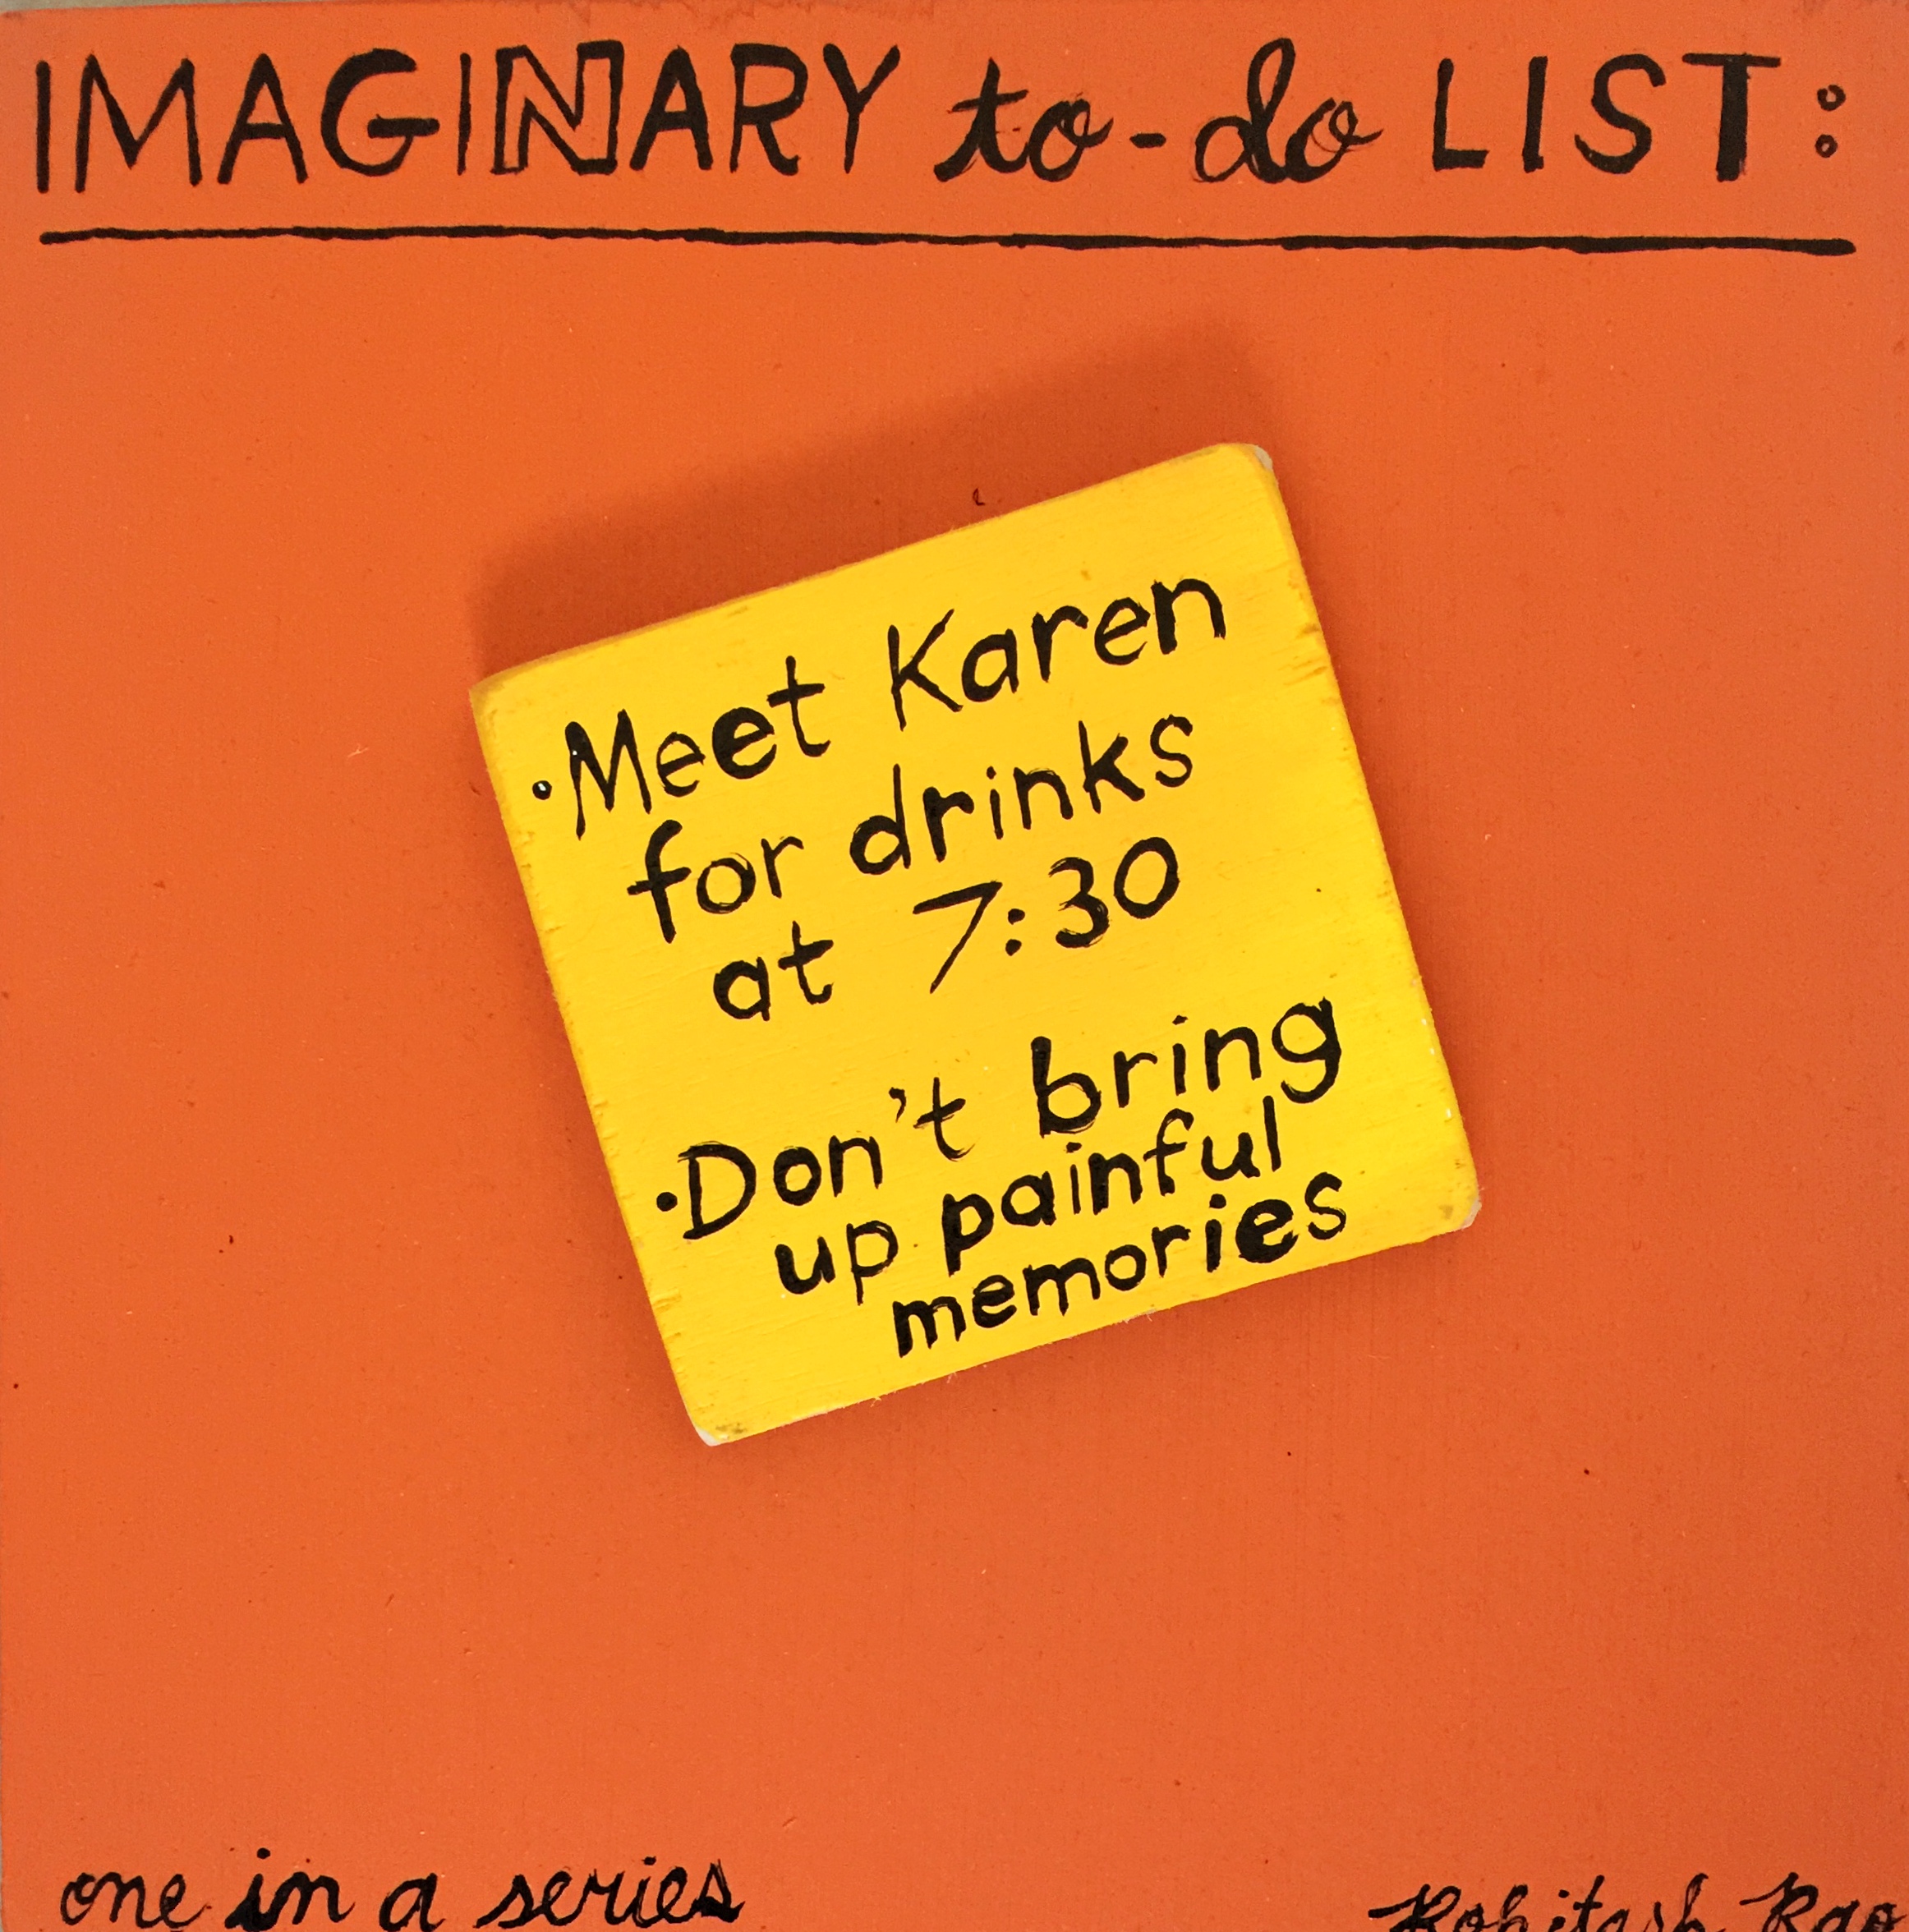 IMAGINARY TO-DO LIST (one in a series)